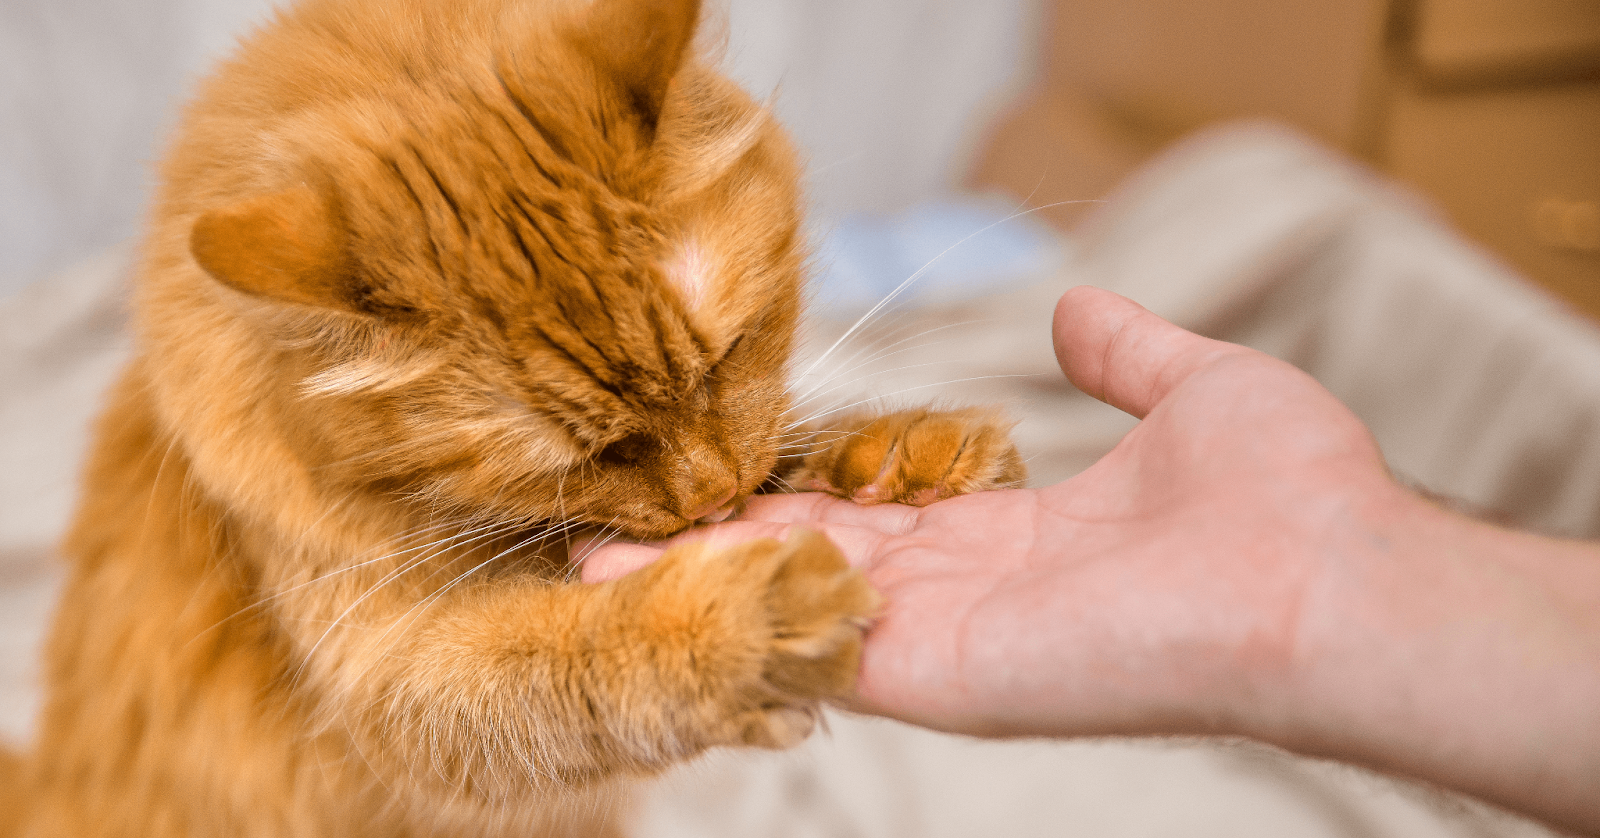 7 Kitten Training Tips for a Purrfect Relationship